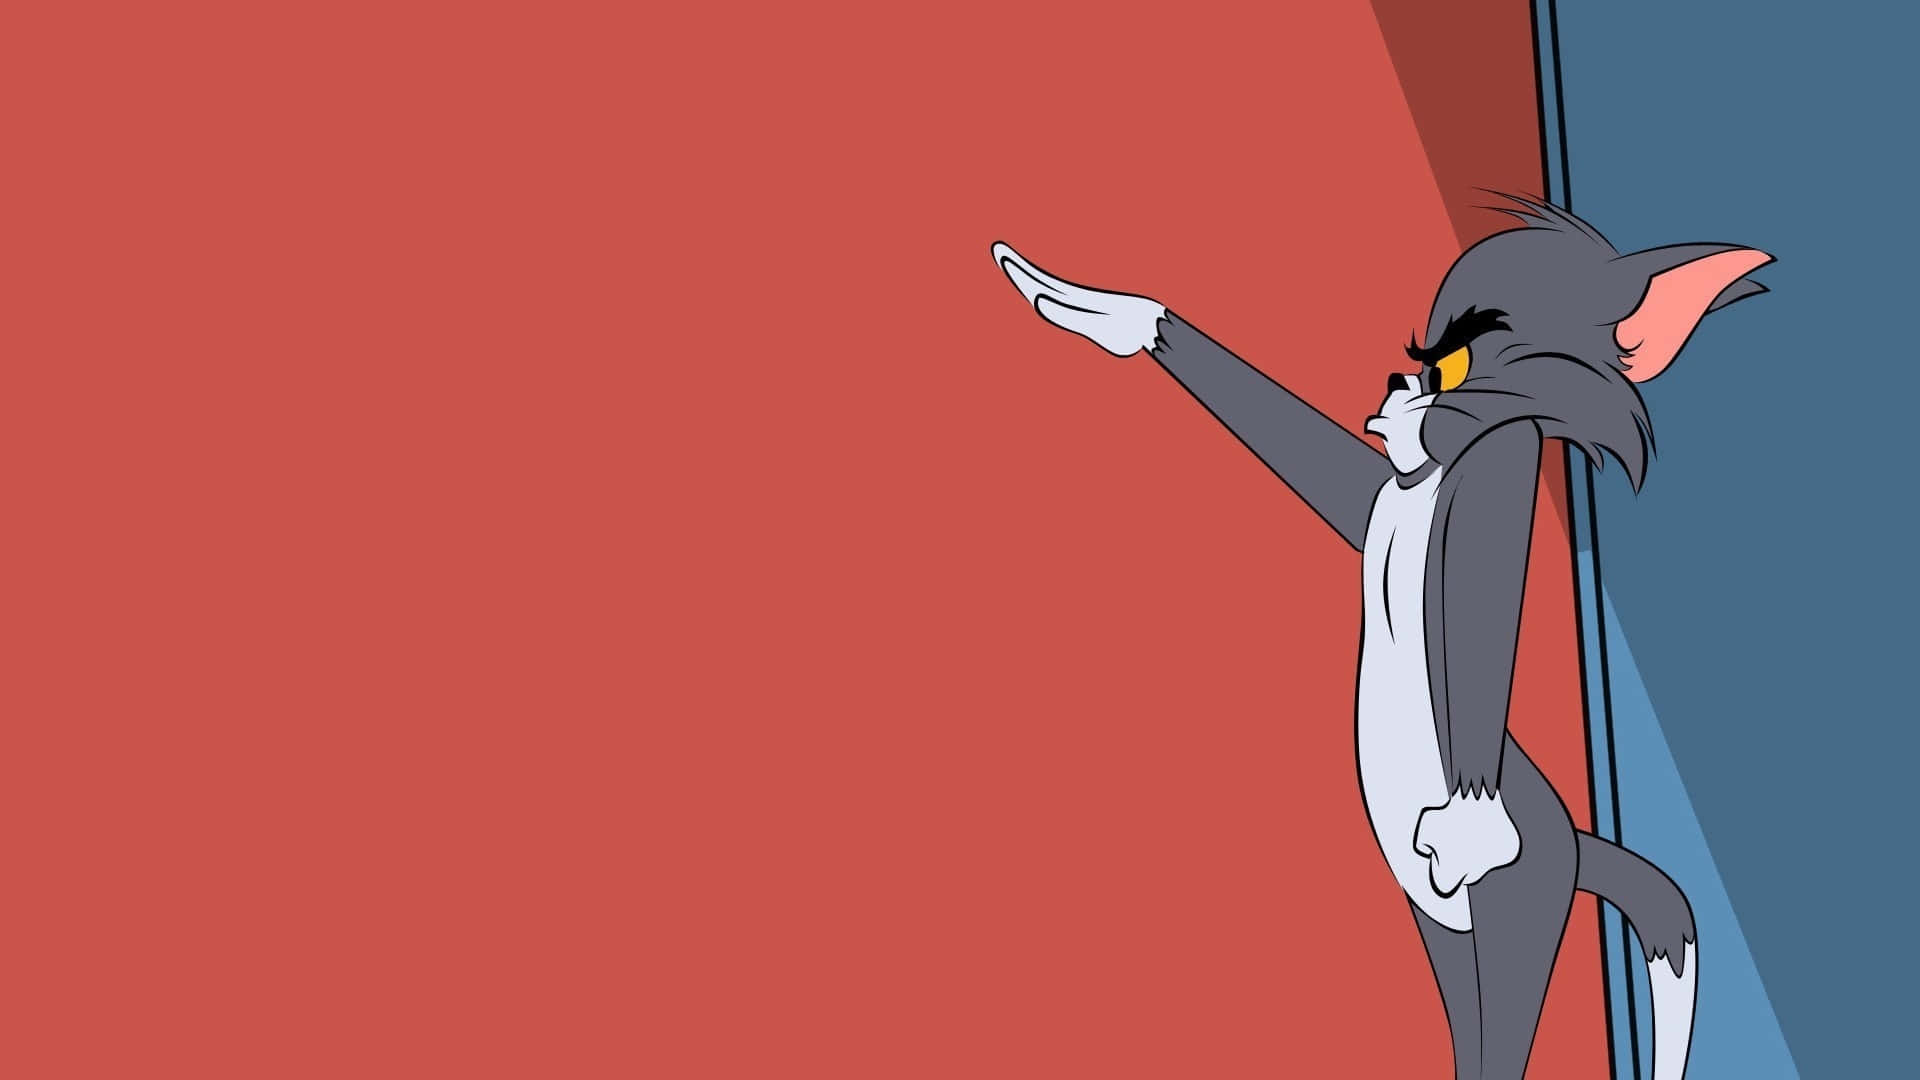 Tom and Jerry having a funny fight Wallpaper